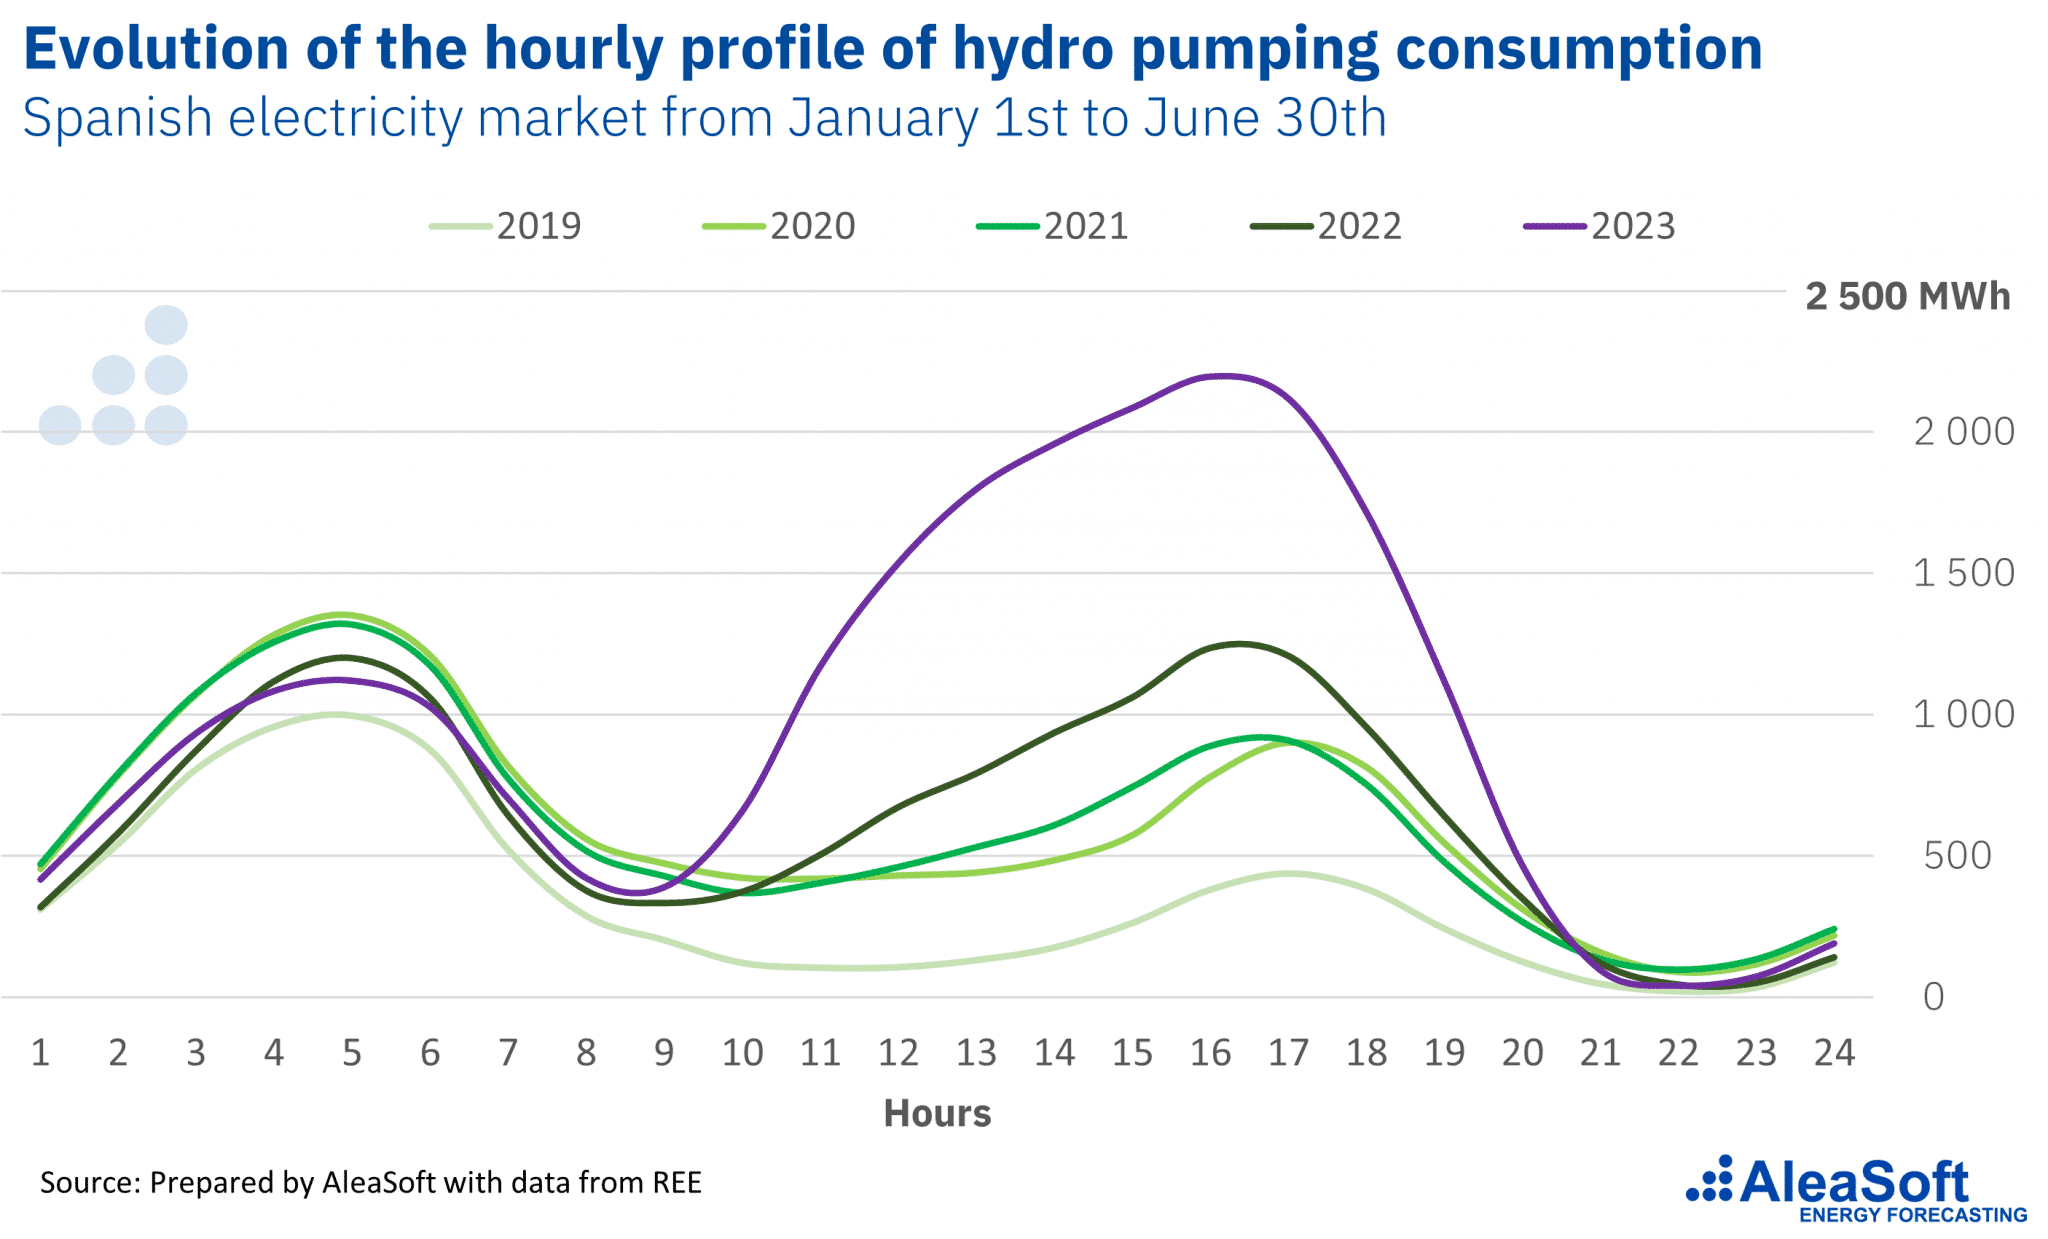 AleaSoft - Average hourly profile hydro pumping consumption Spain